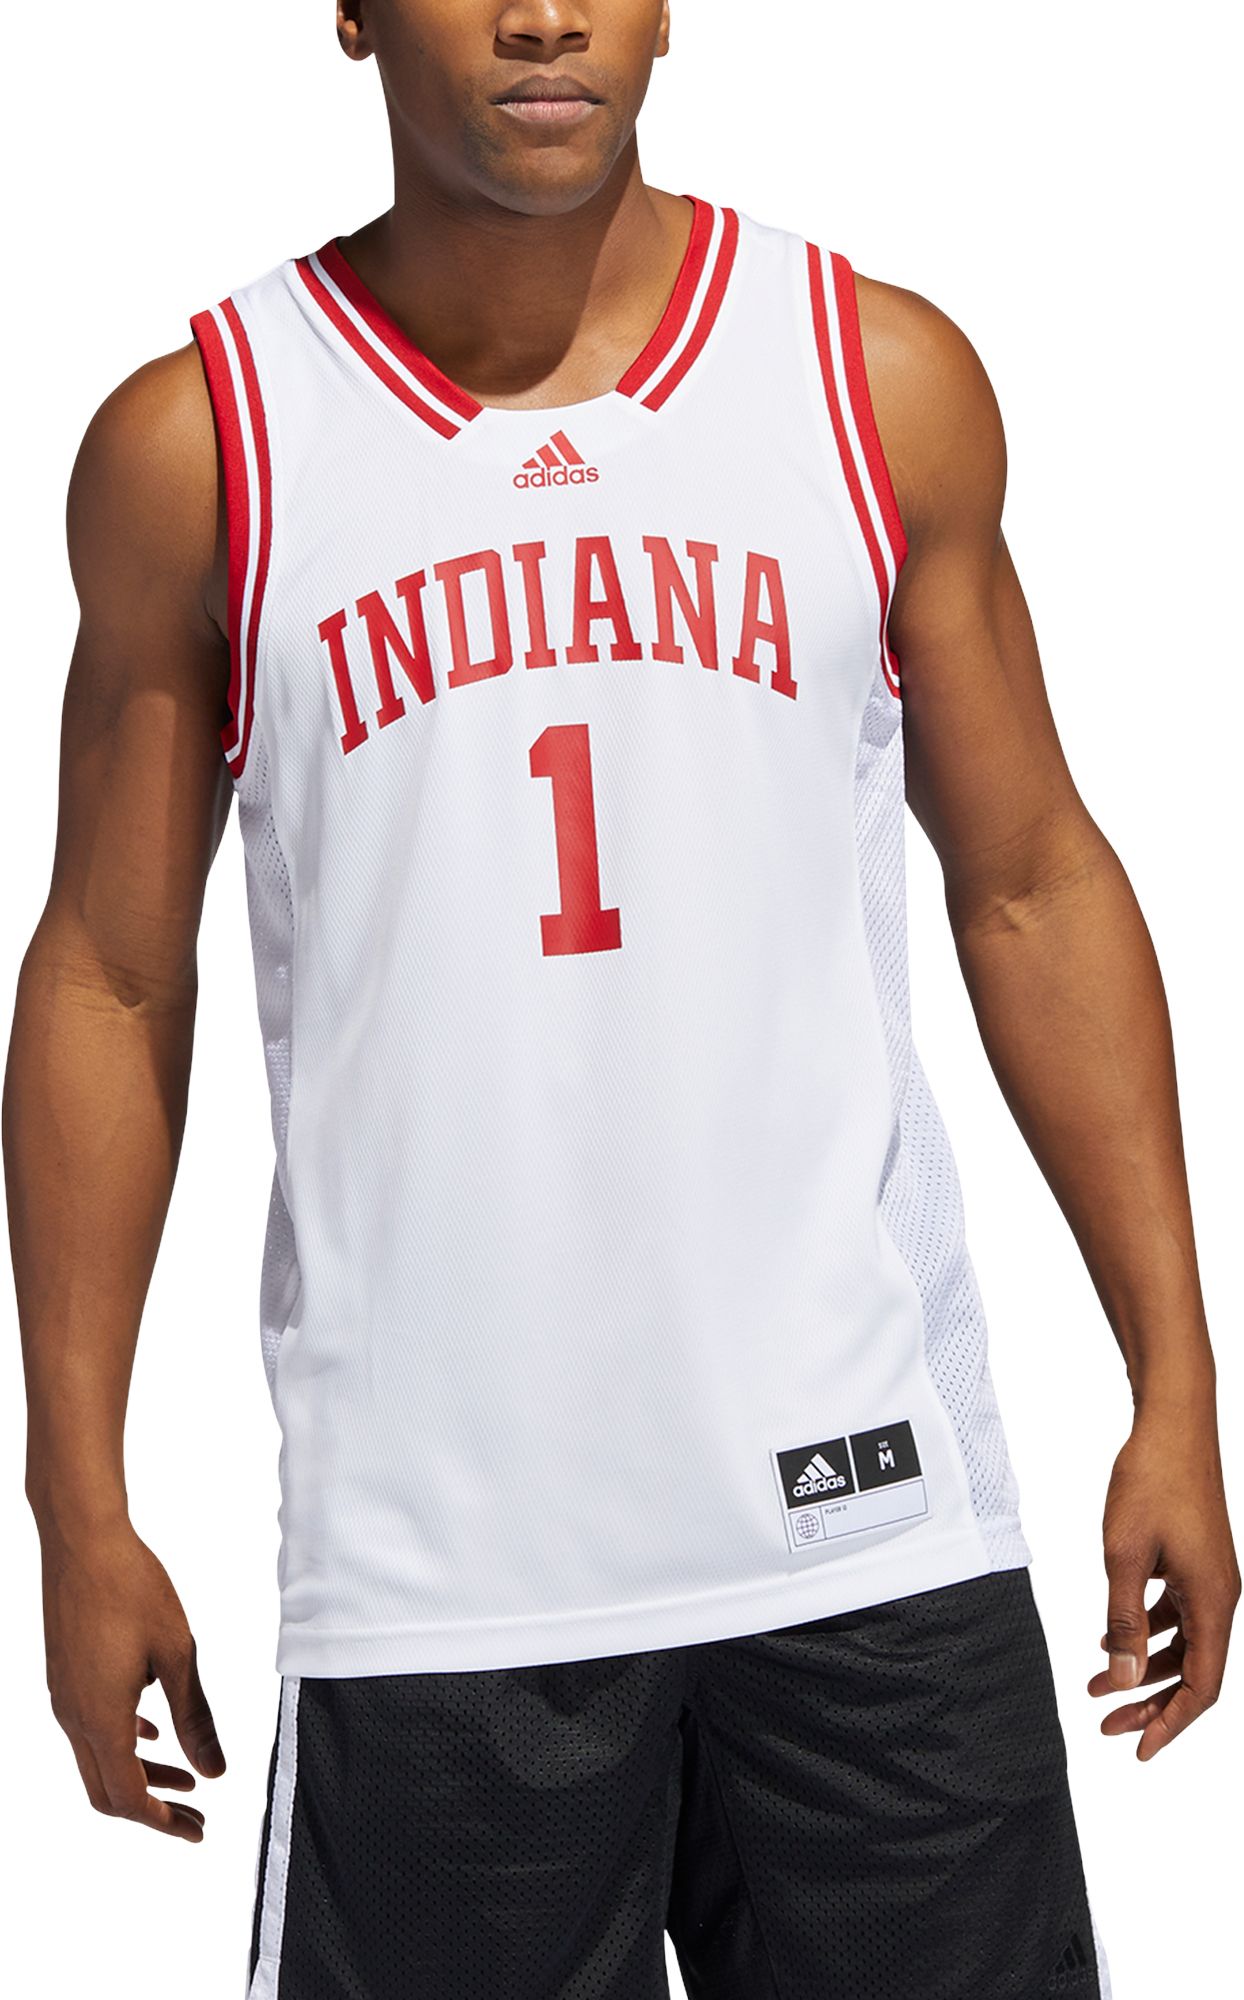 Indiana Hoosiers All-American jersey